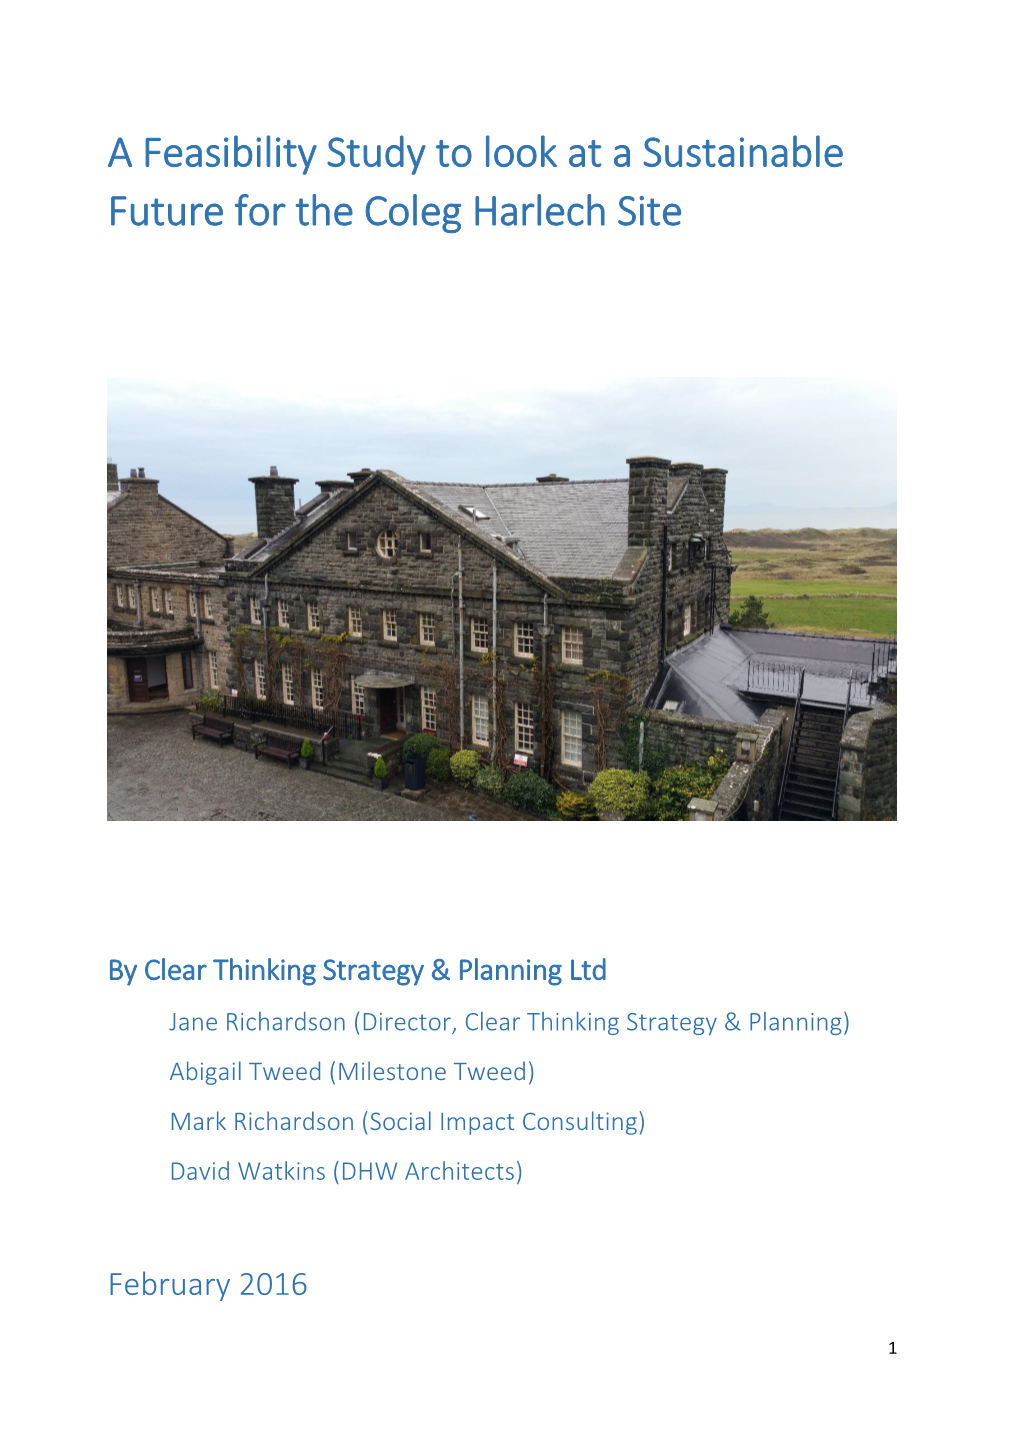 A Feasibility Study to Look at a Sustainable Future for the Coleg Harlech Site